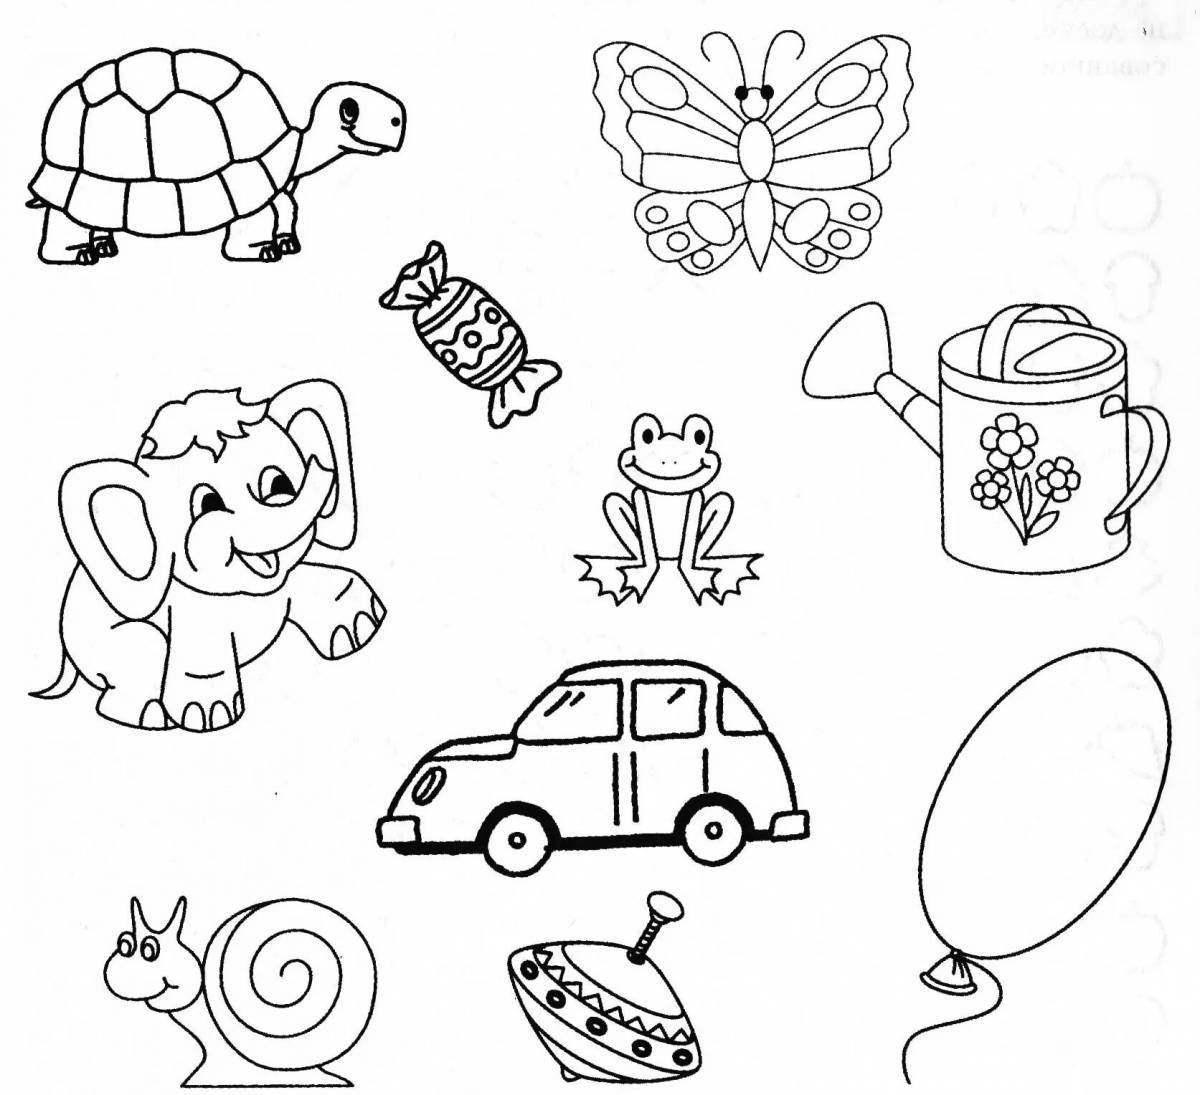 Colourful coloring pages for the little ones